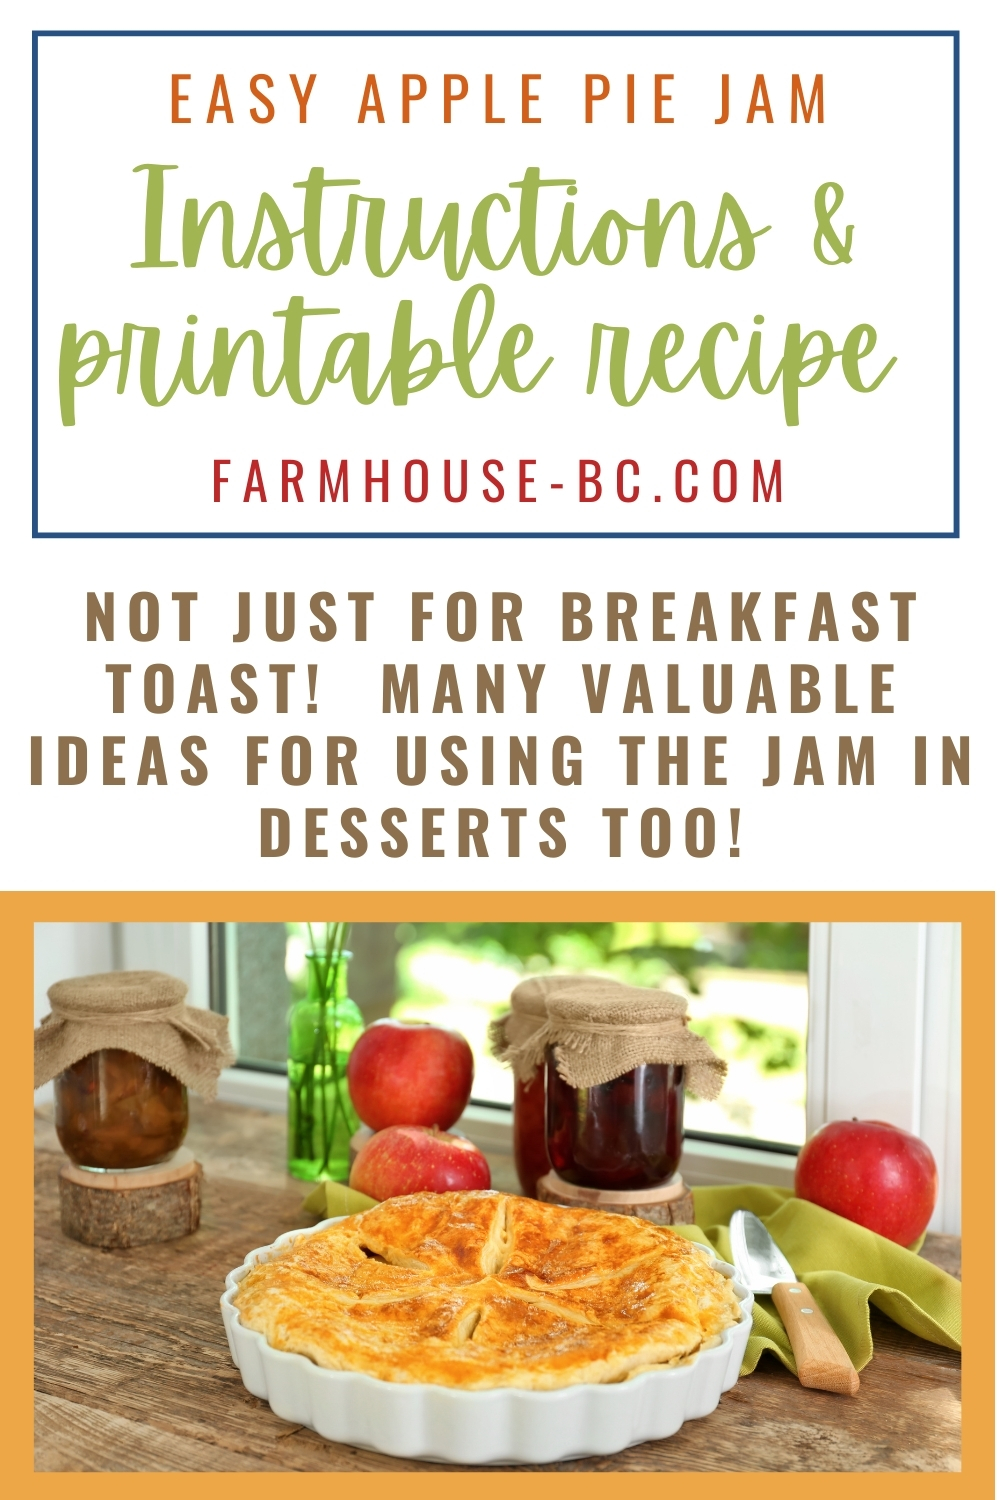 Learn how to make easy apple pie jam with a recipe.